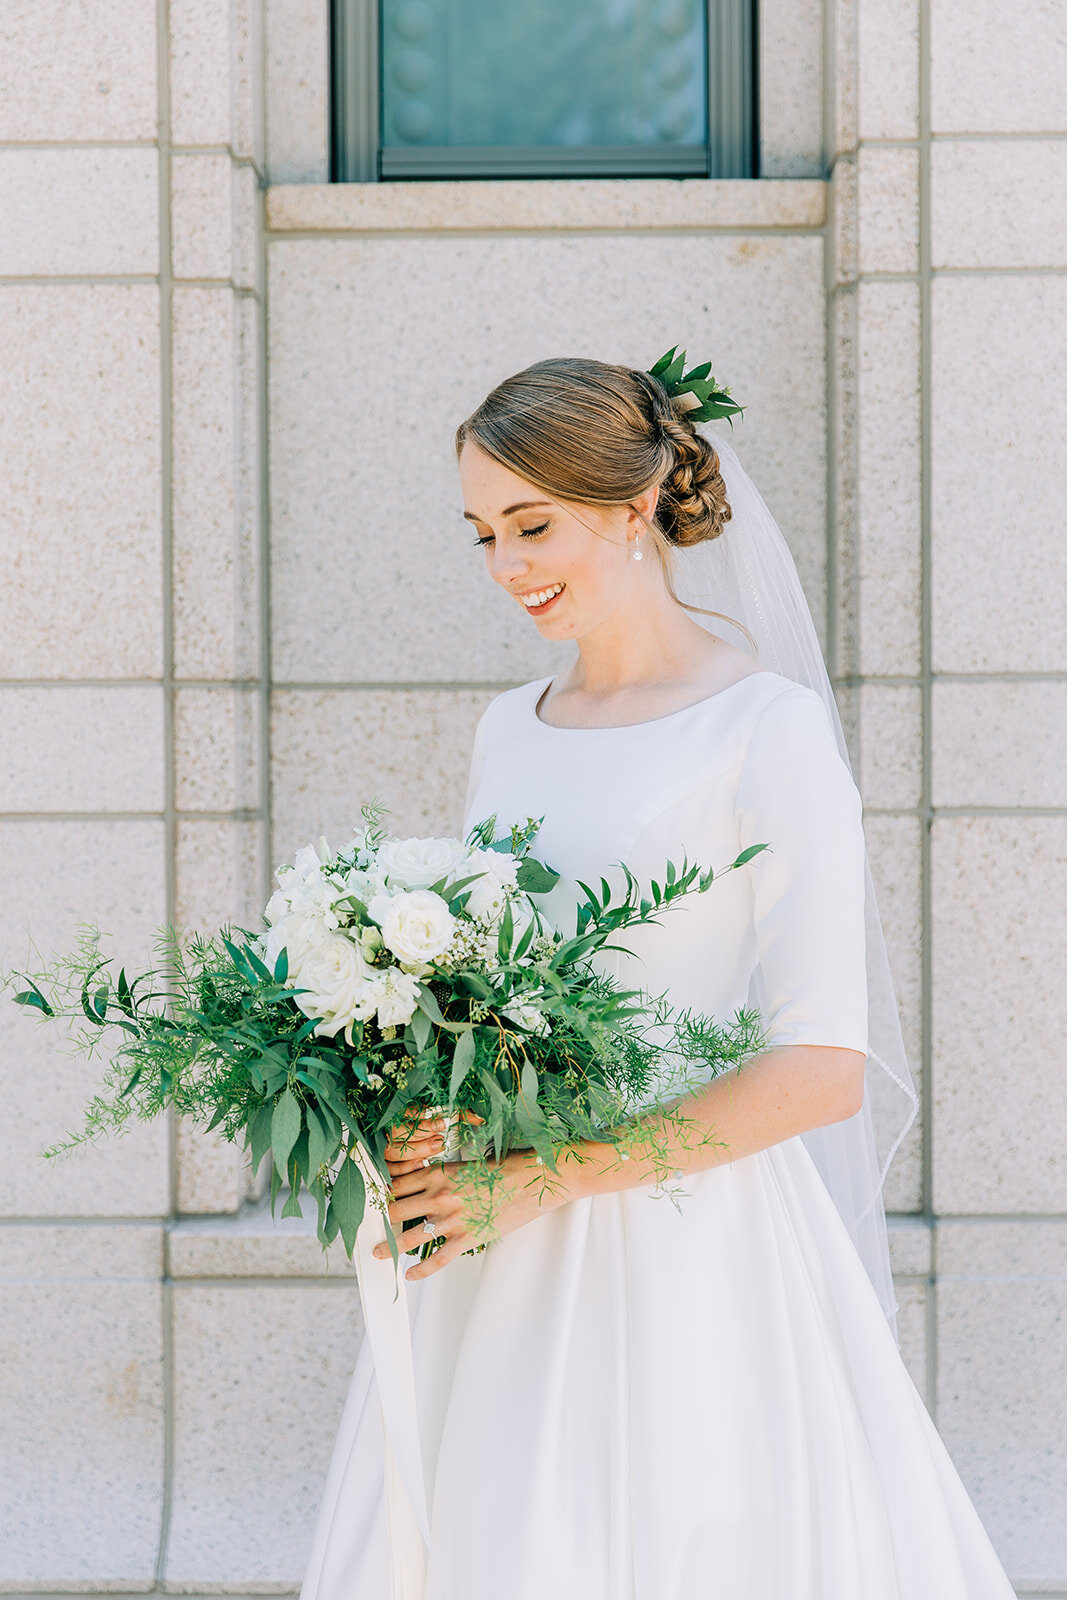  lds bride wedding hair and make-up inspiration for summer wedding white and green floral bouquet with lots of greenery floral inspiration in hair wedding updo long veil elbow-length sleeves modest wedding gown pictures after the sealing outside the 